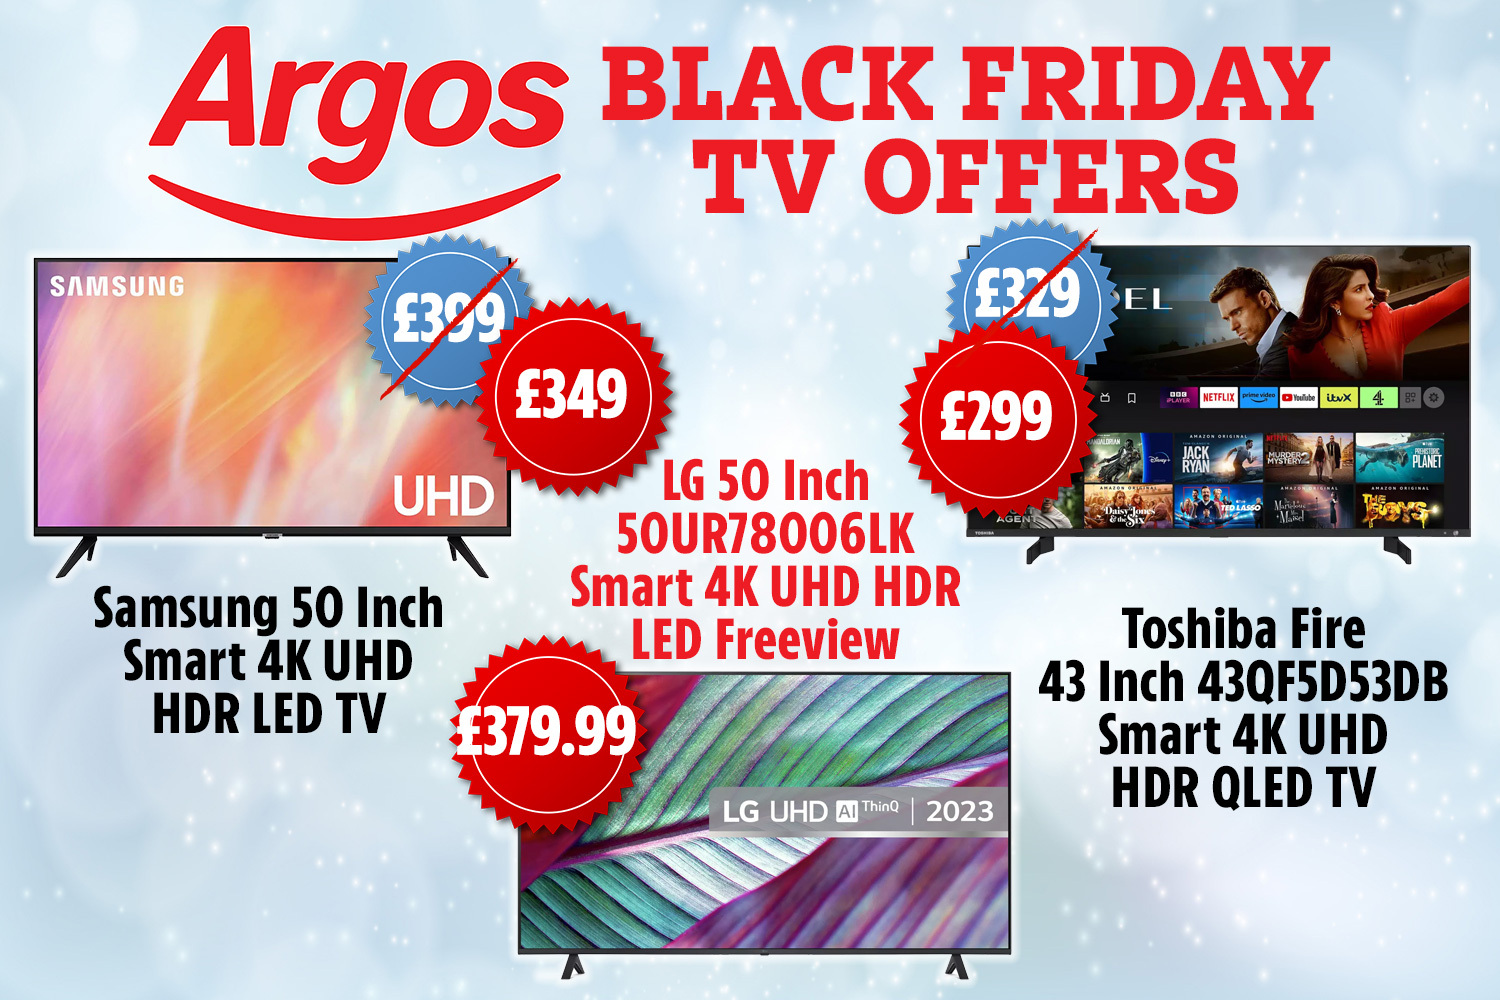 Argos is offering great prices on TVs